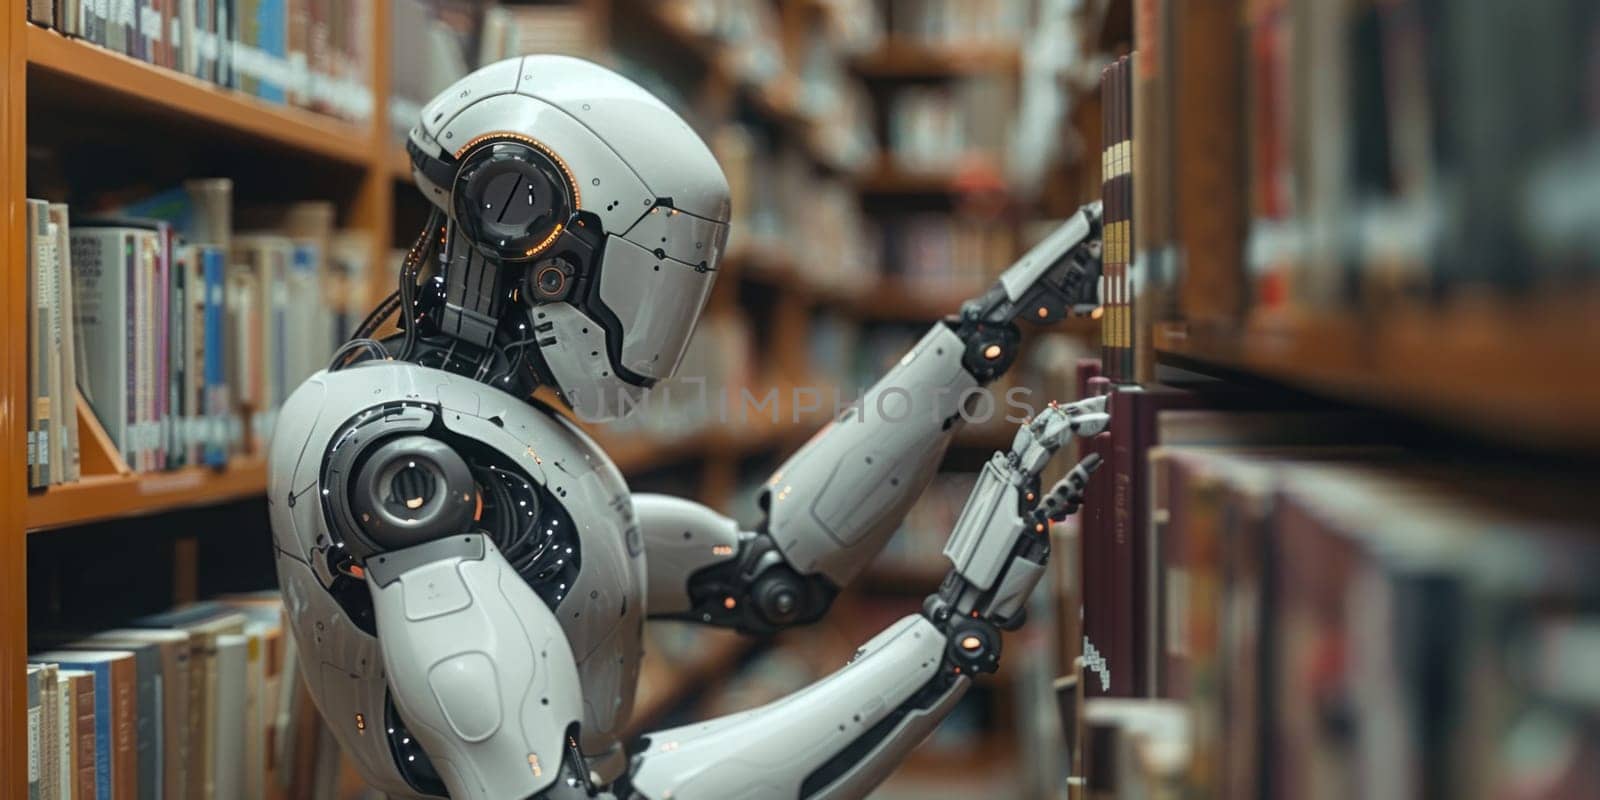 Robot Holding Book in Library by but_photo